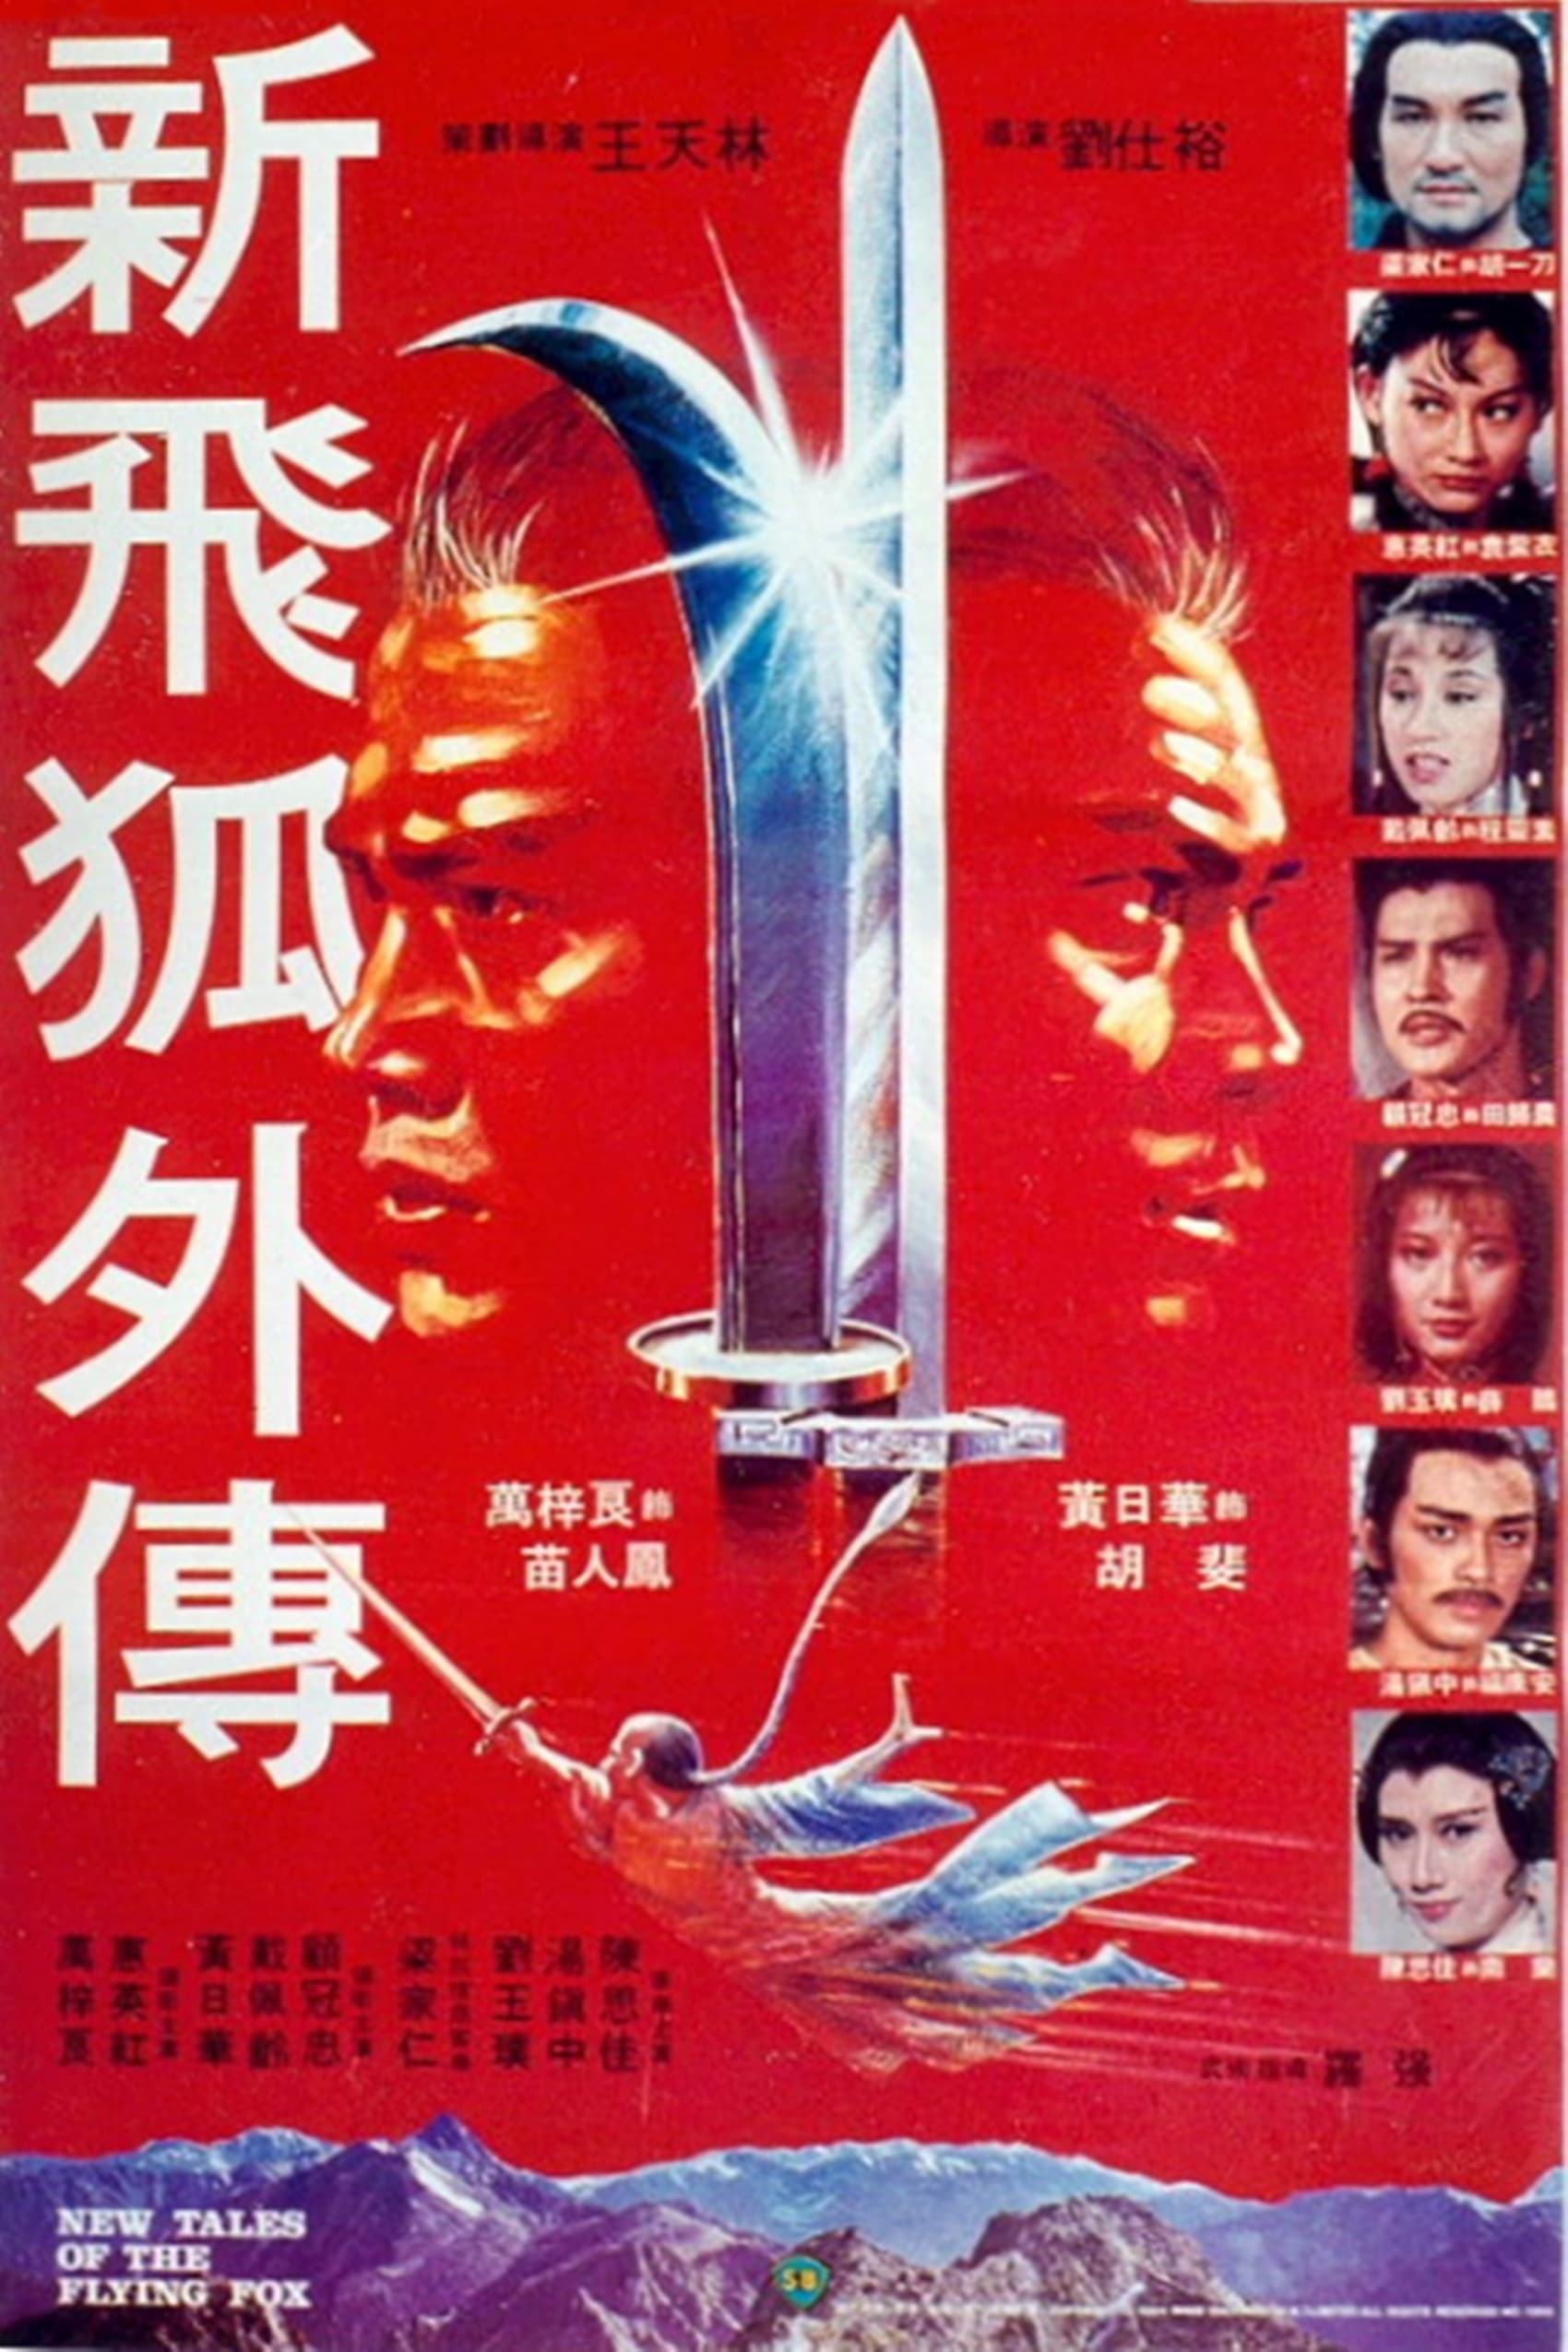 New Tales of the Flying Fox (1984)